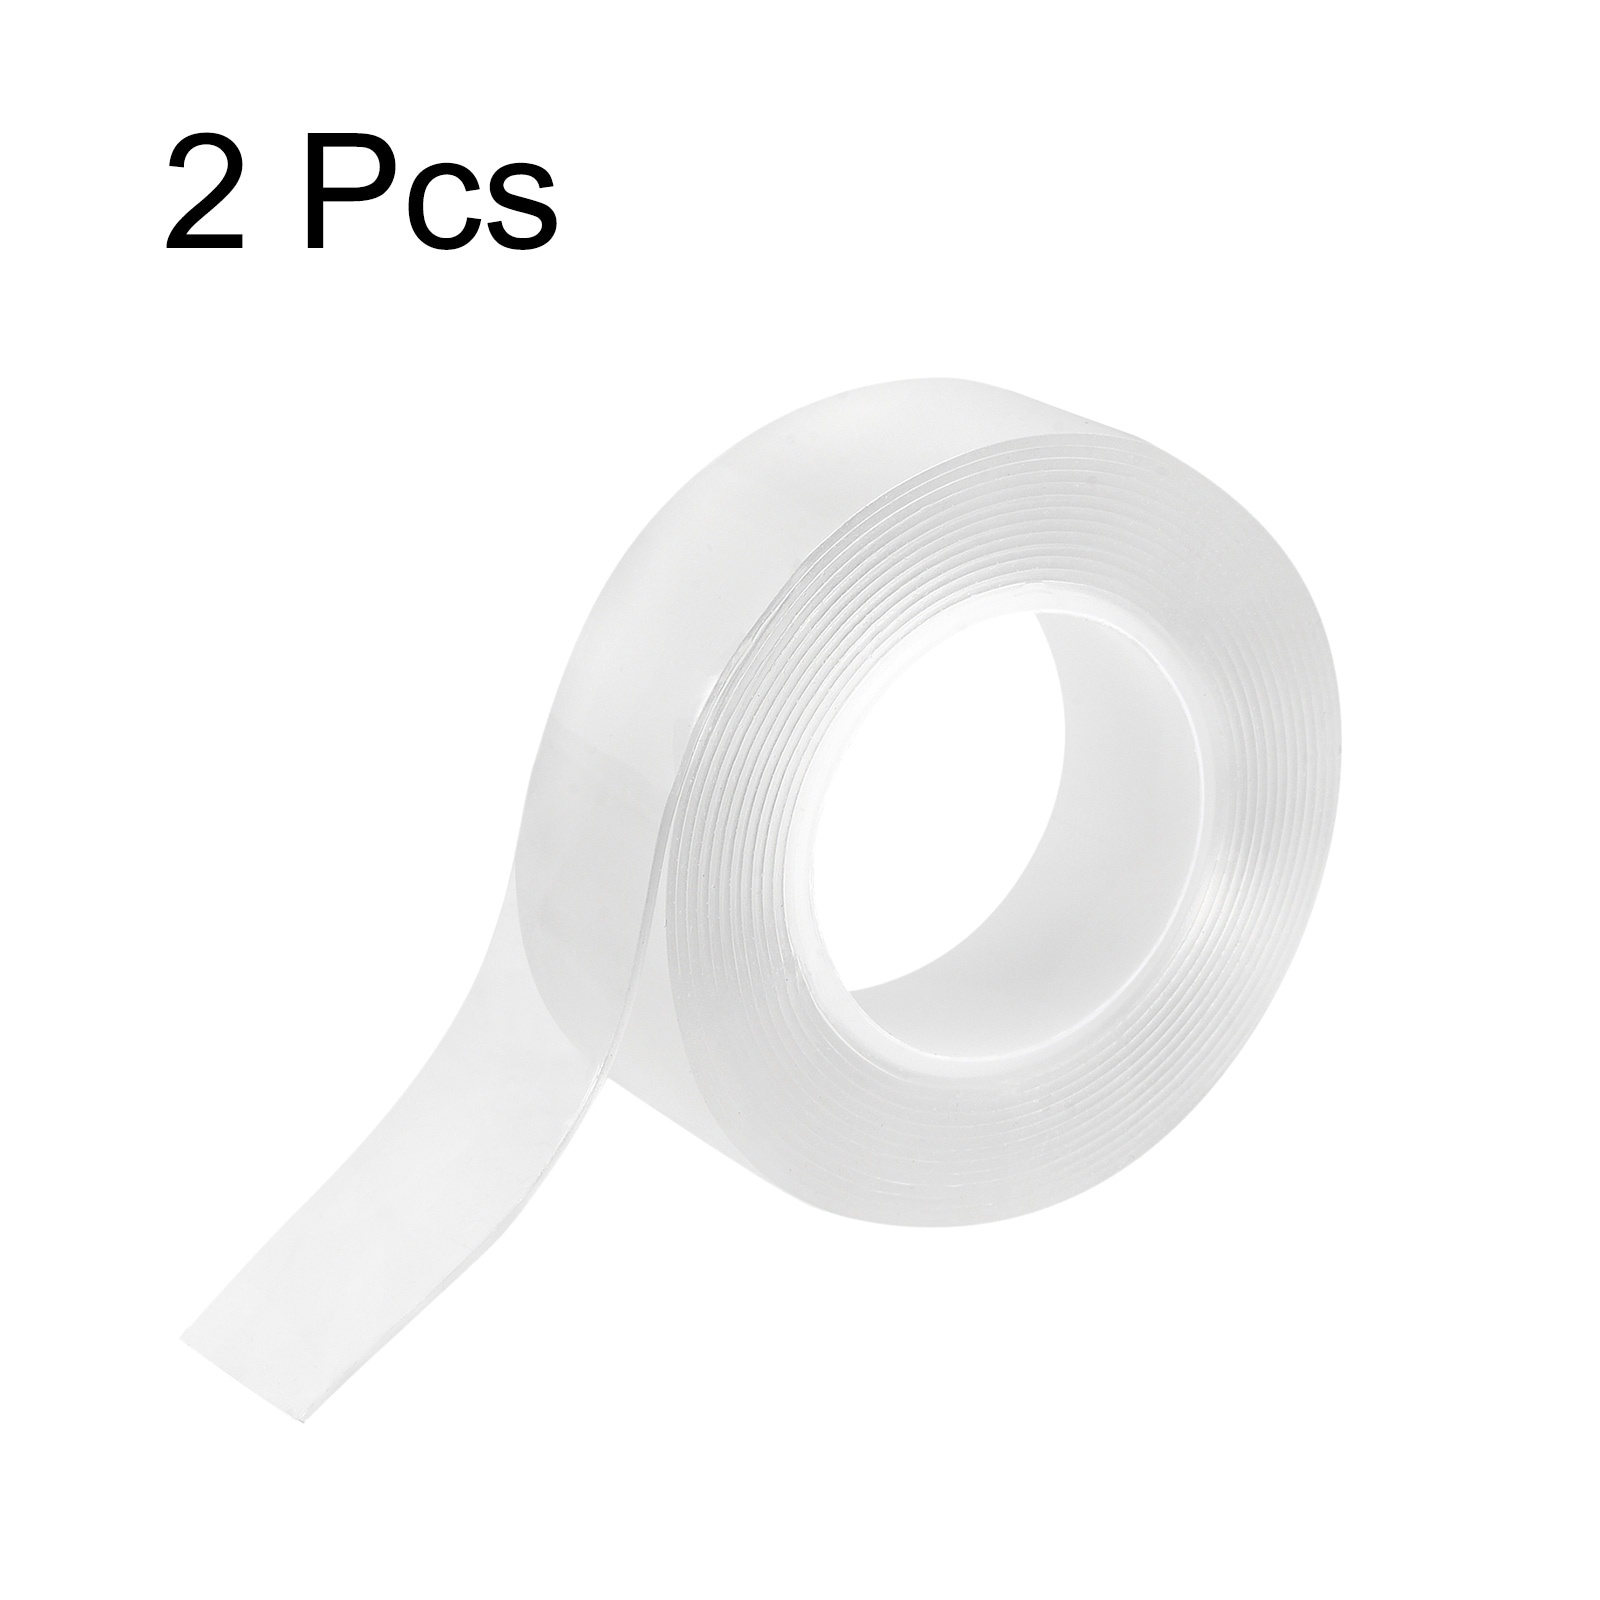 Double Sided Tape-2000x20x1mm Strong Adhesive Mounting Tape for Wall, 2pcs Tape - Transparent - 2000mm x 20mm x 1mm